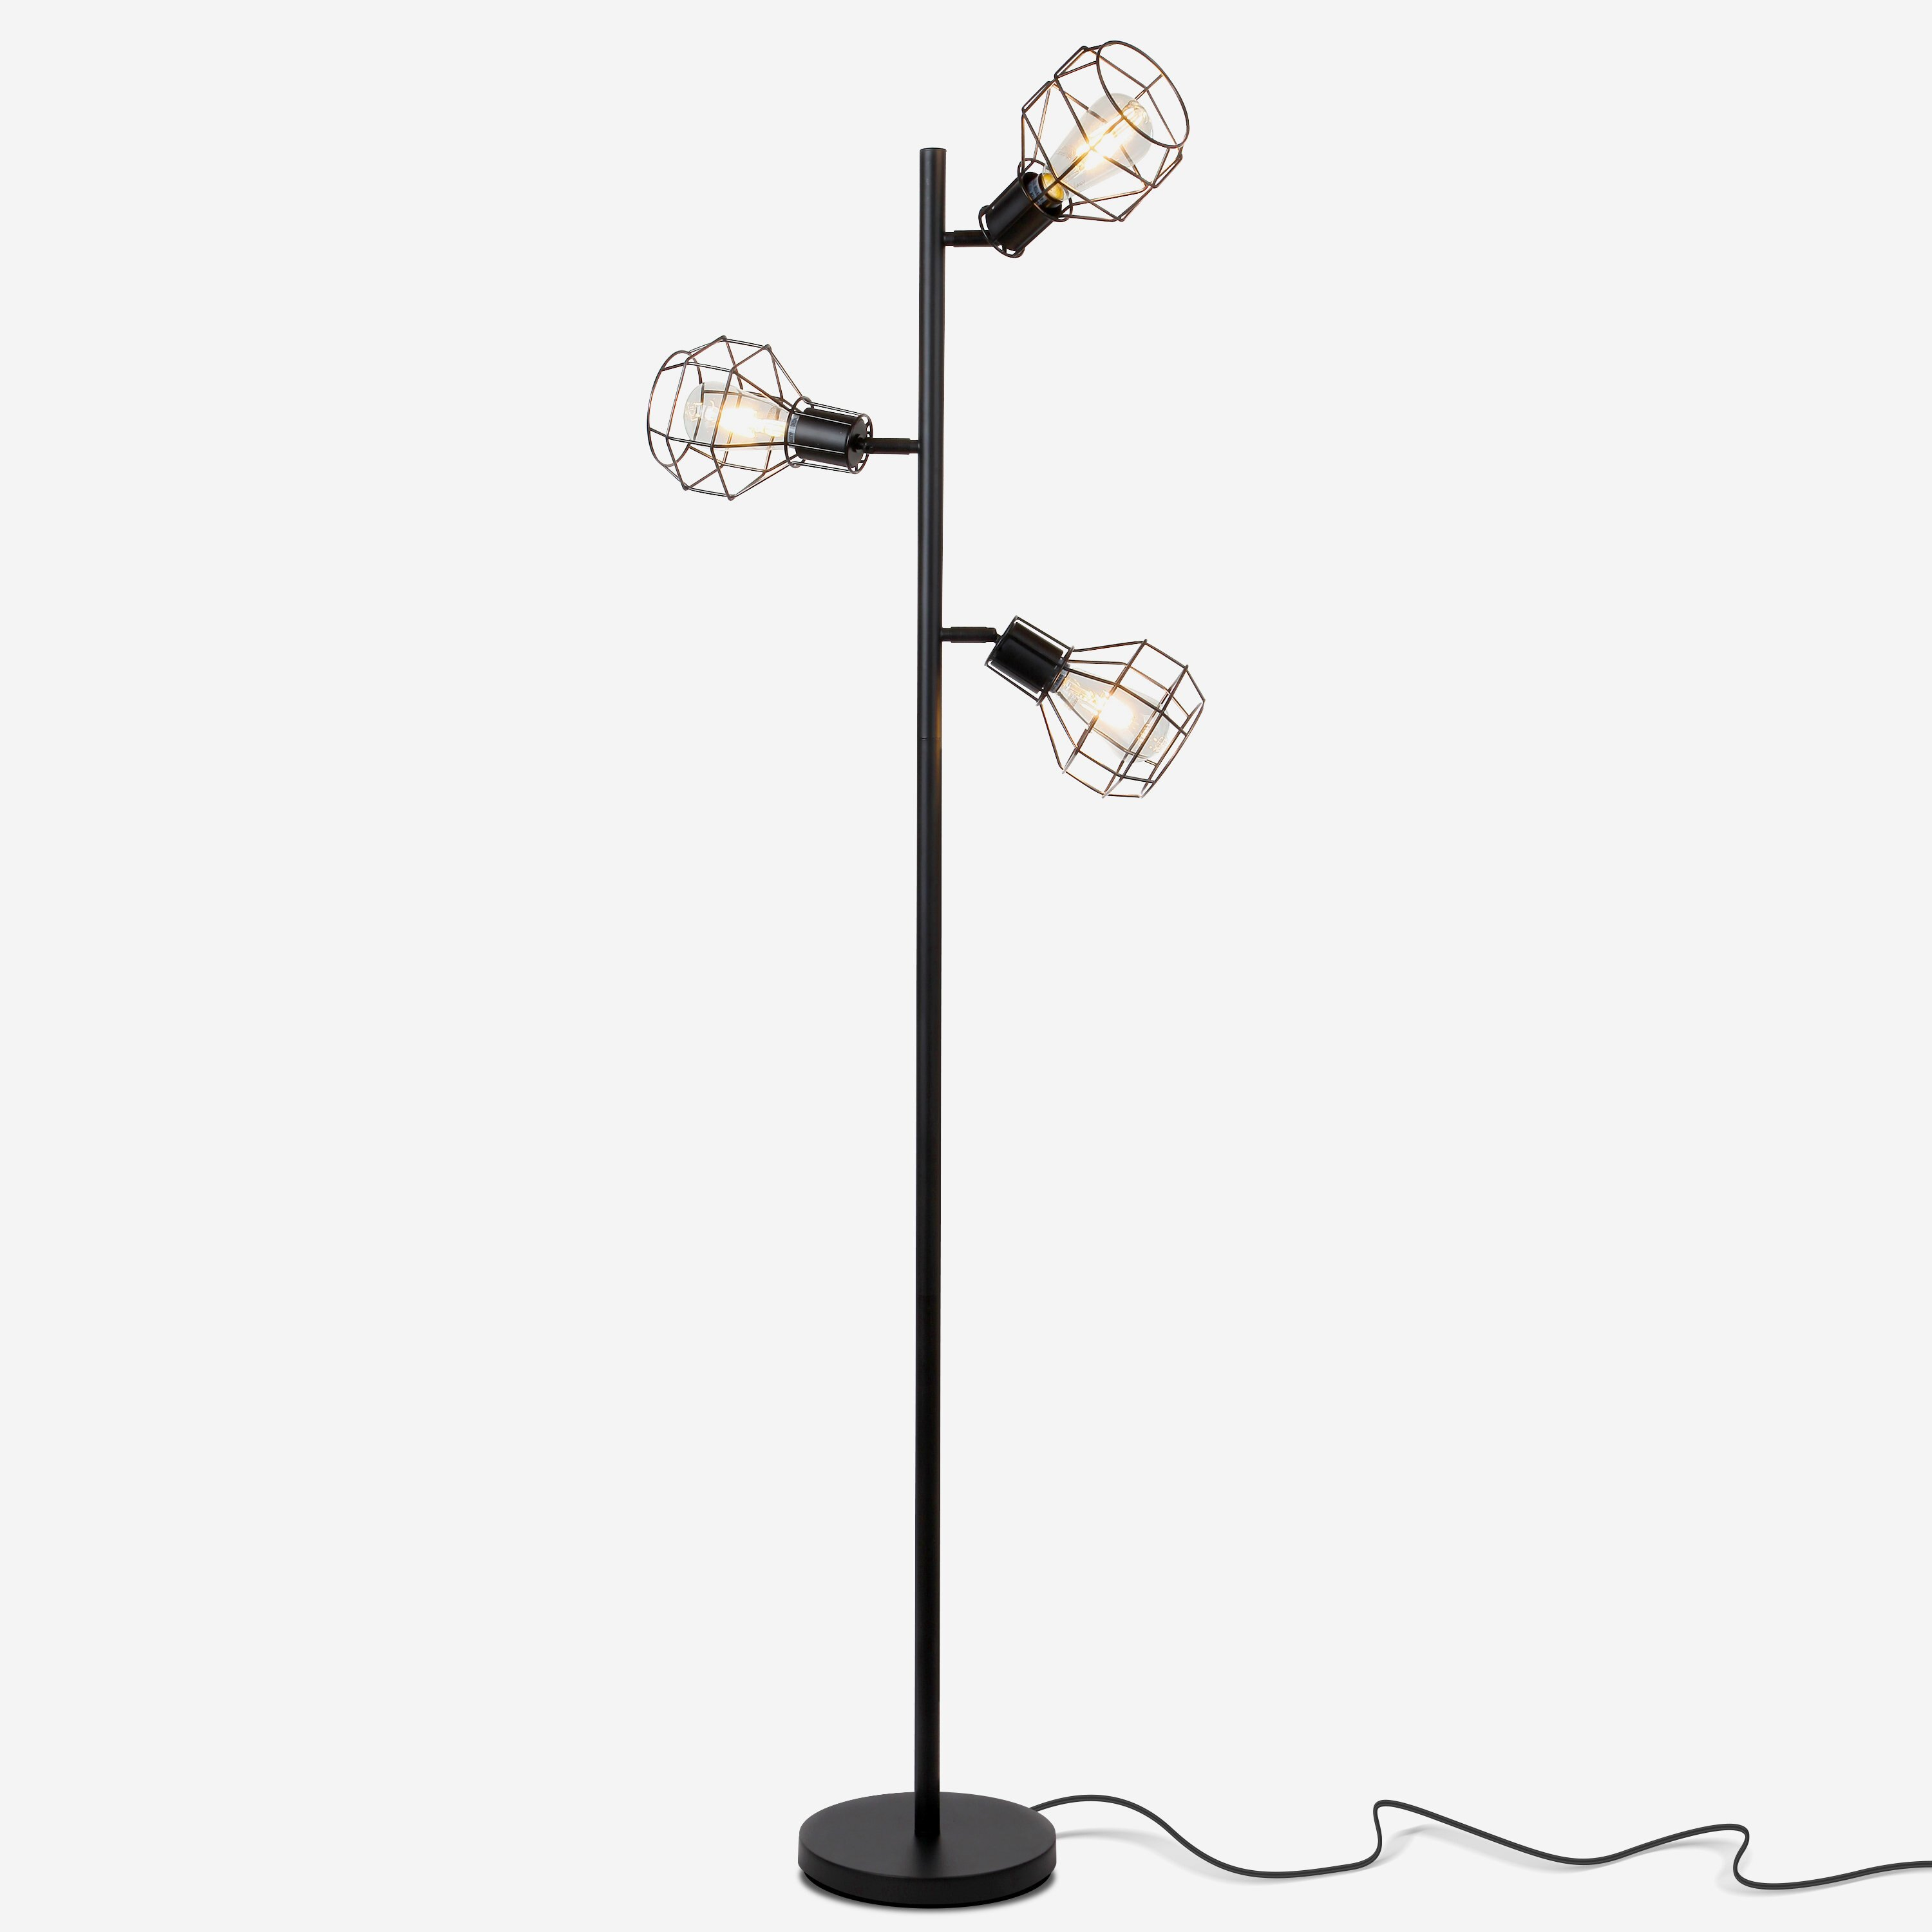 Robin Tree Led Floor Lamp Industrial Modern Style Cage Lantern Shade Tall Free Standing Pole With 3 Vintage Led Light Bulbs Contemporary Bright inside size 3000 X 3000